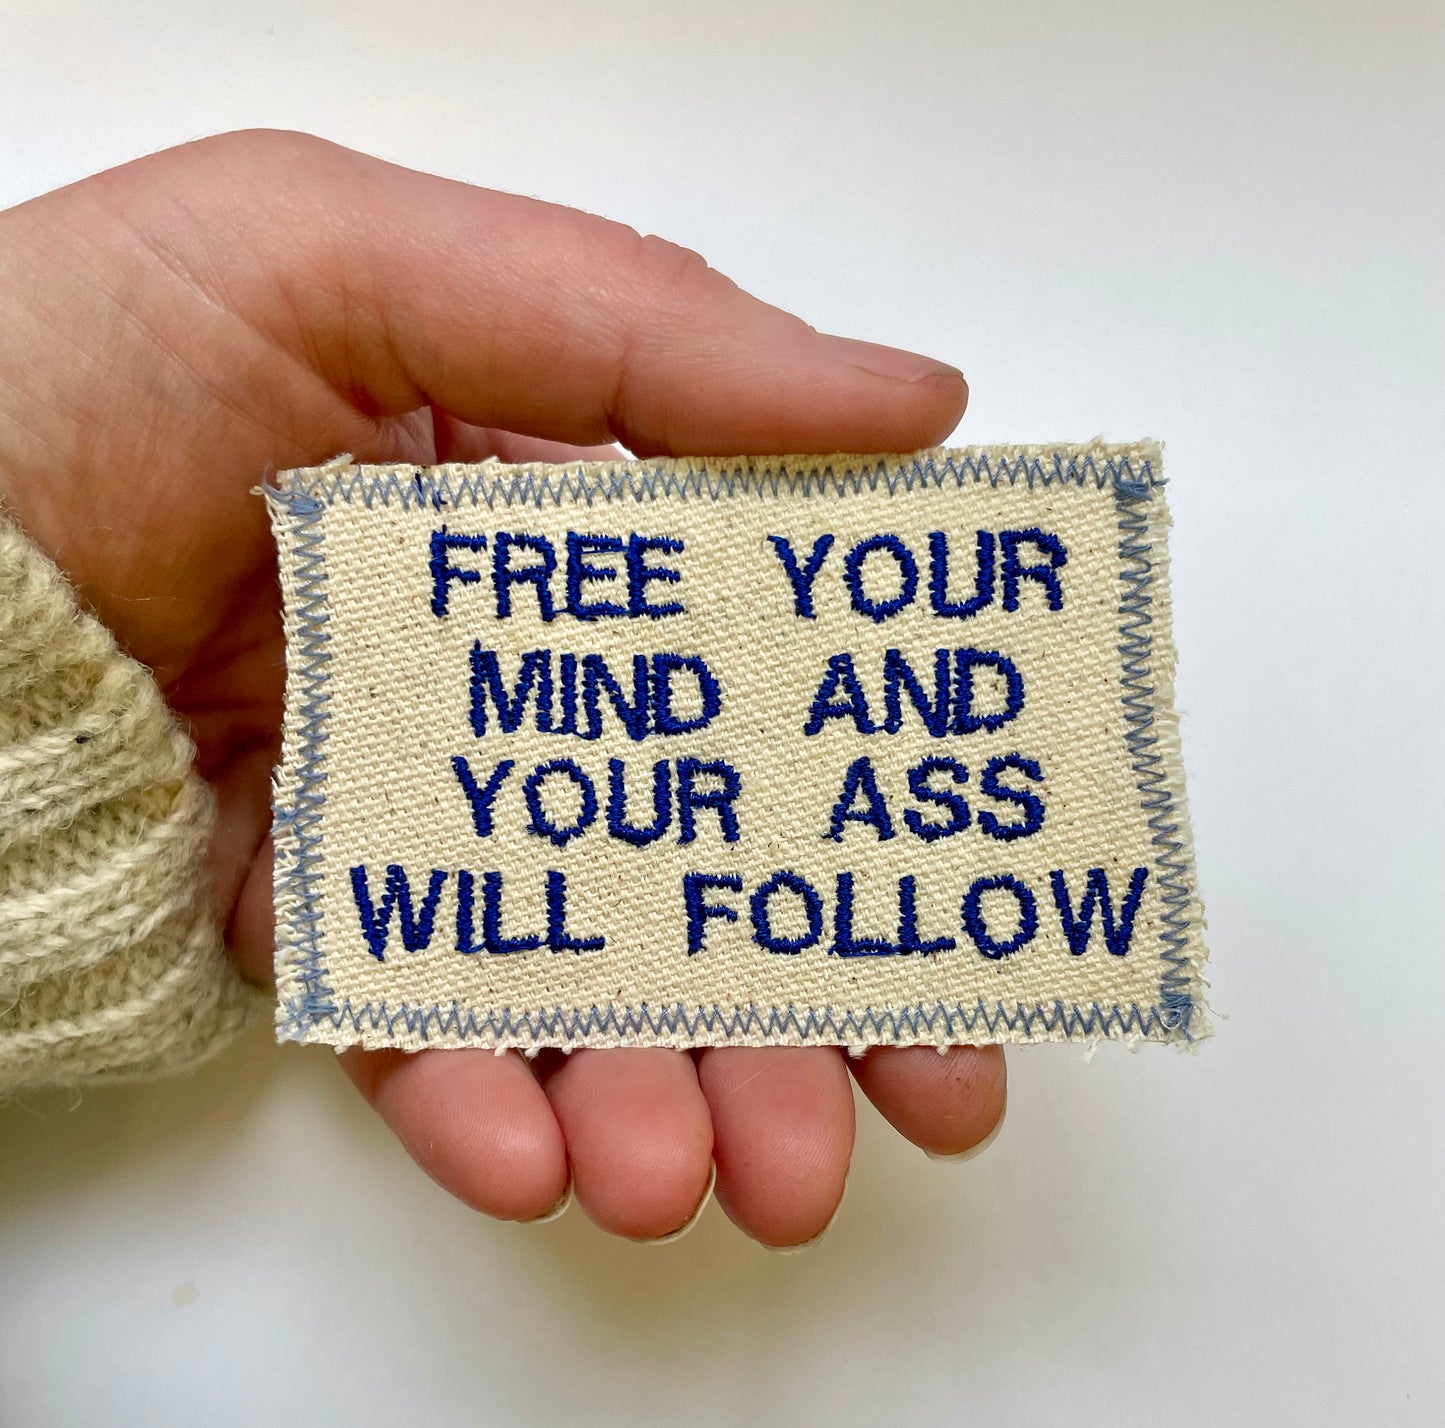 a hand holding a piece of cloth that says free your mind and your ass will